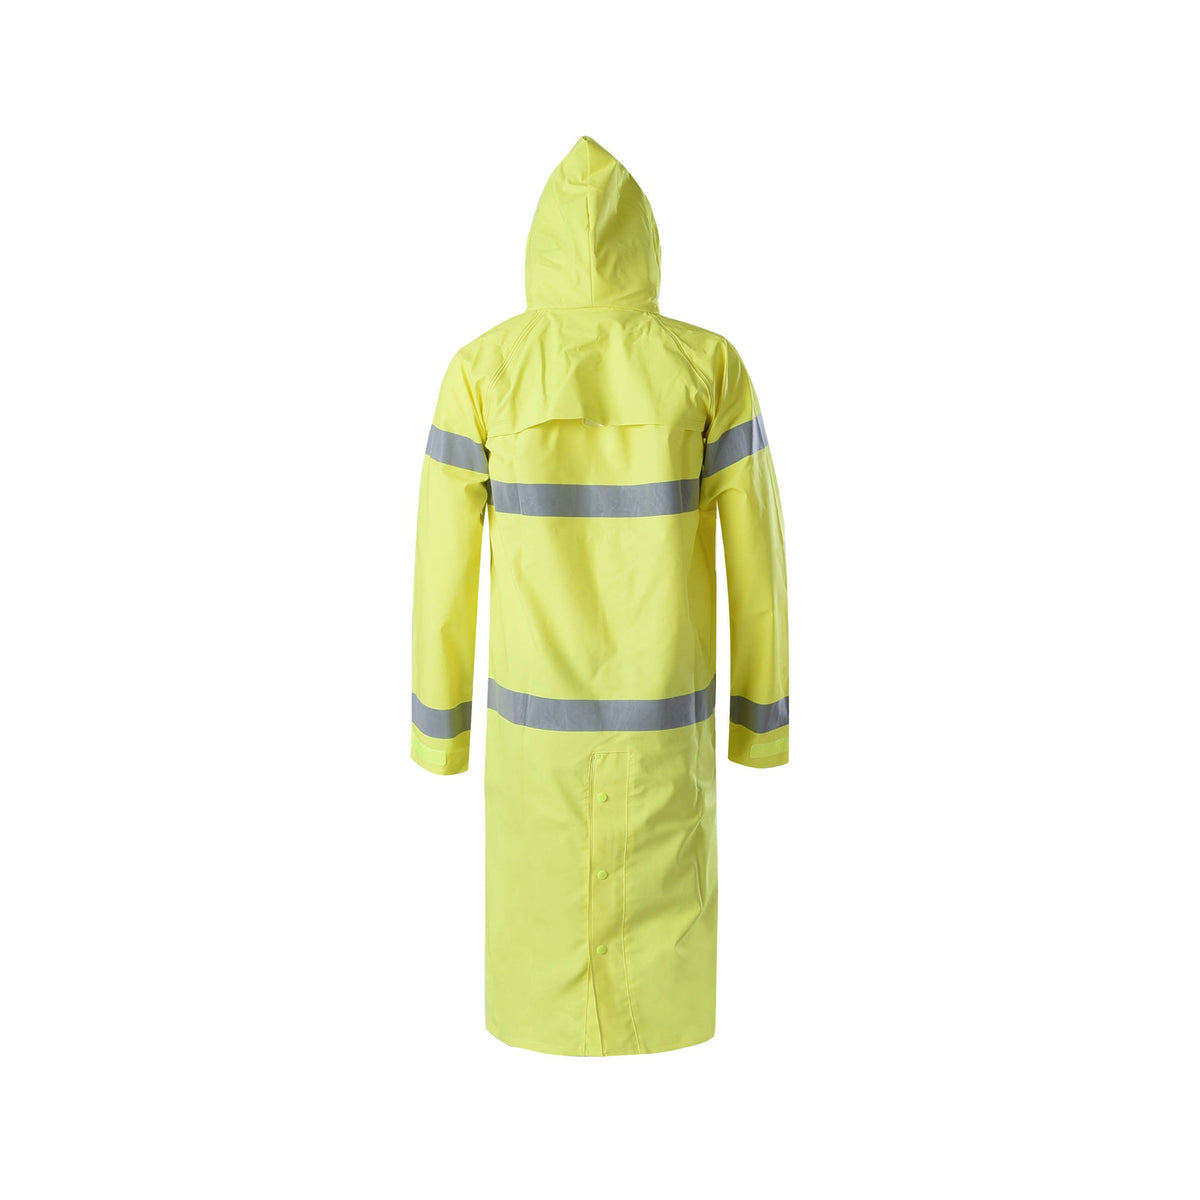 Brite Safety Style 5214 FR Safety Raingear | Hi Vis Raincoat with Hood | Waterproof | Flame Resistant | ANSI 107 Class 3 Compliant